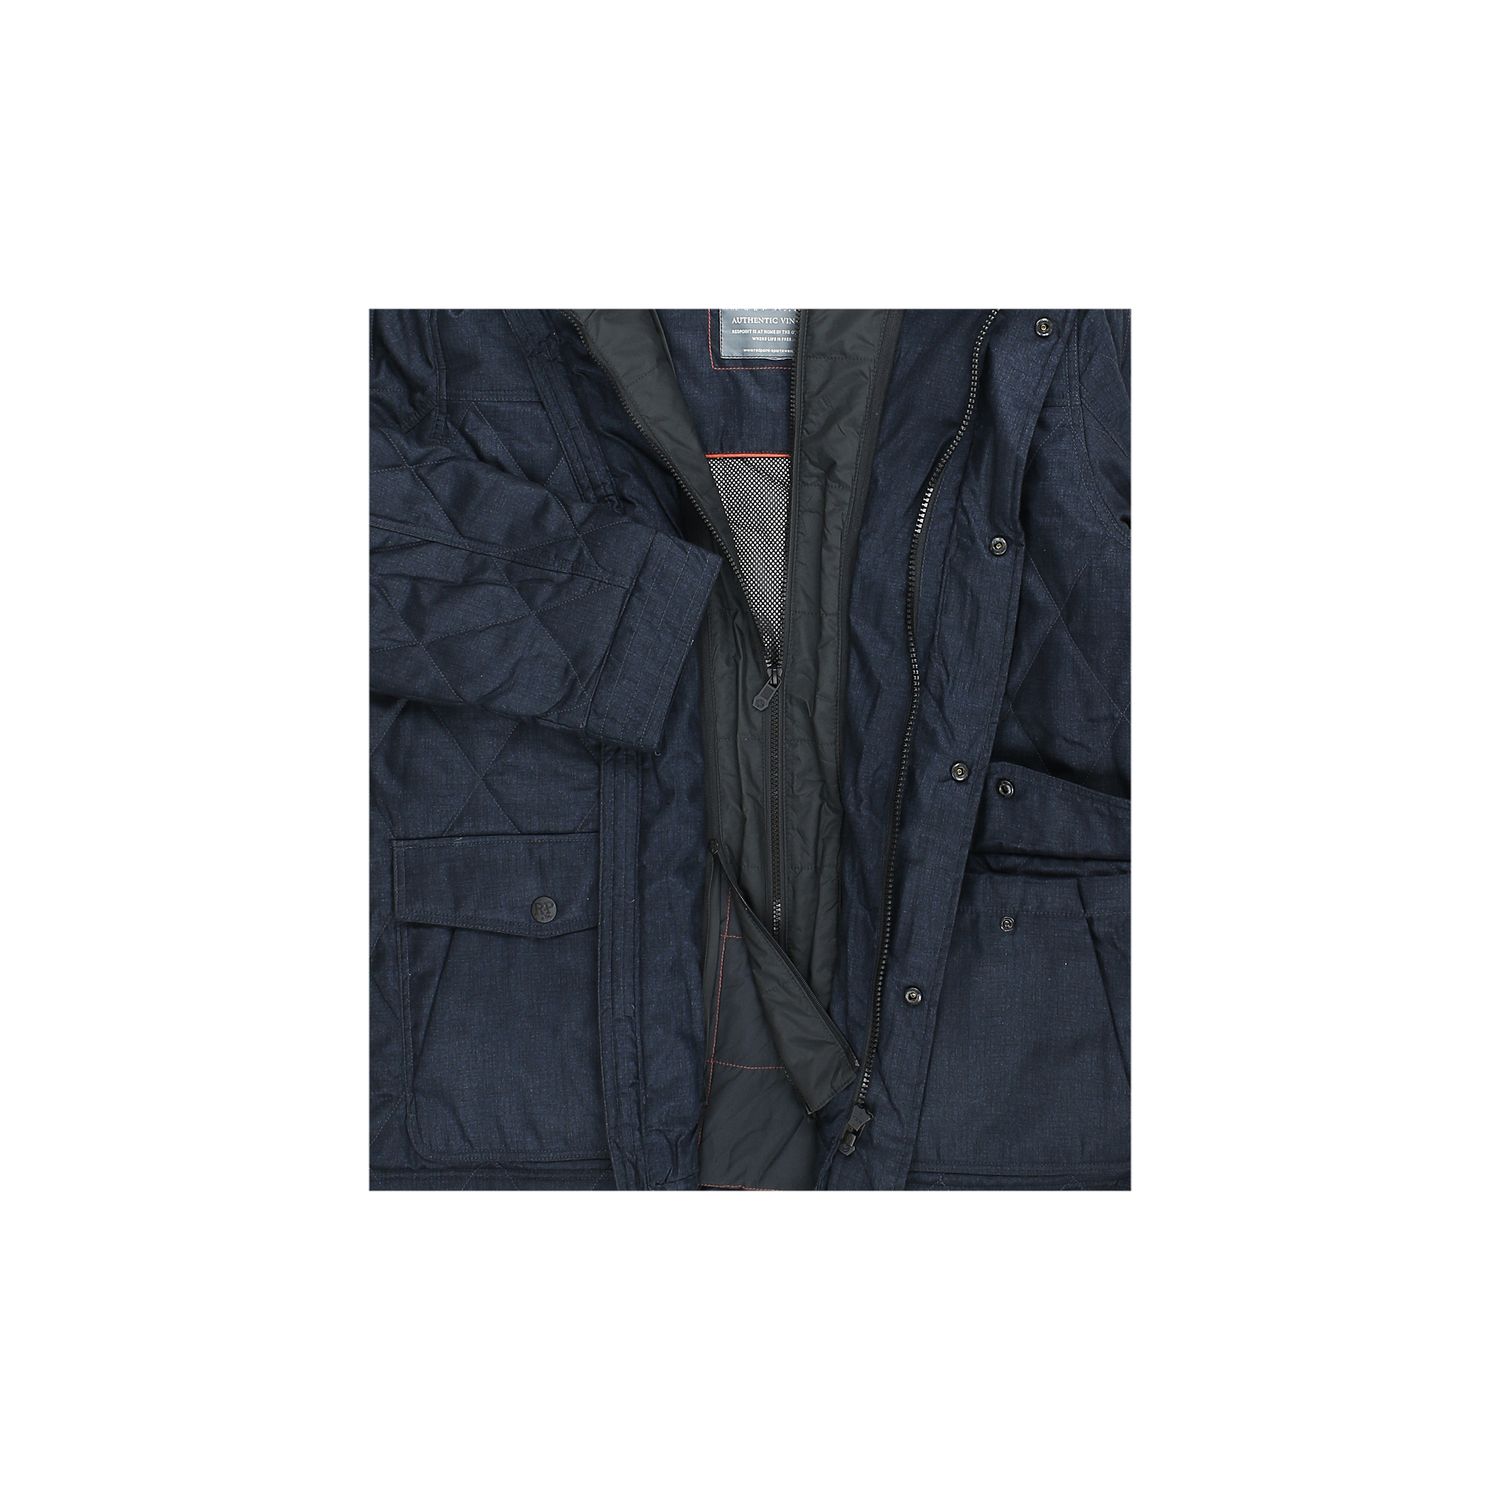 Winter jacket "Peter" in dark blue by redpoint in large sizes 58 to 70